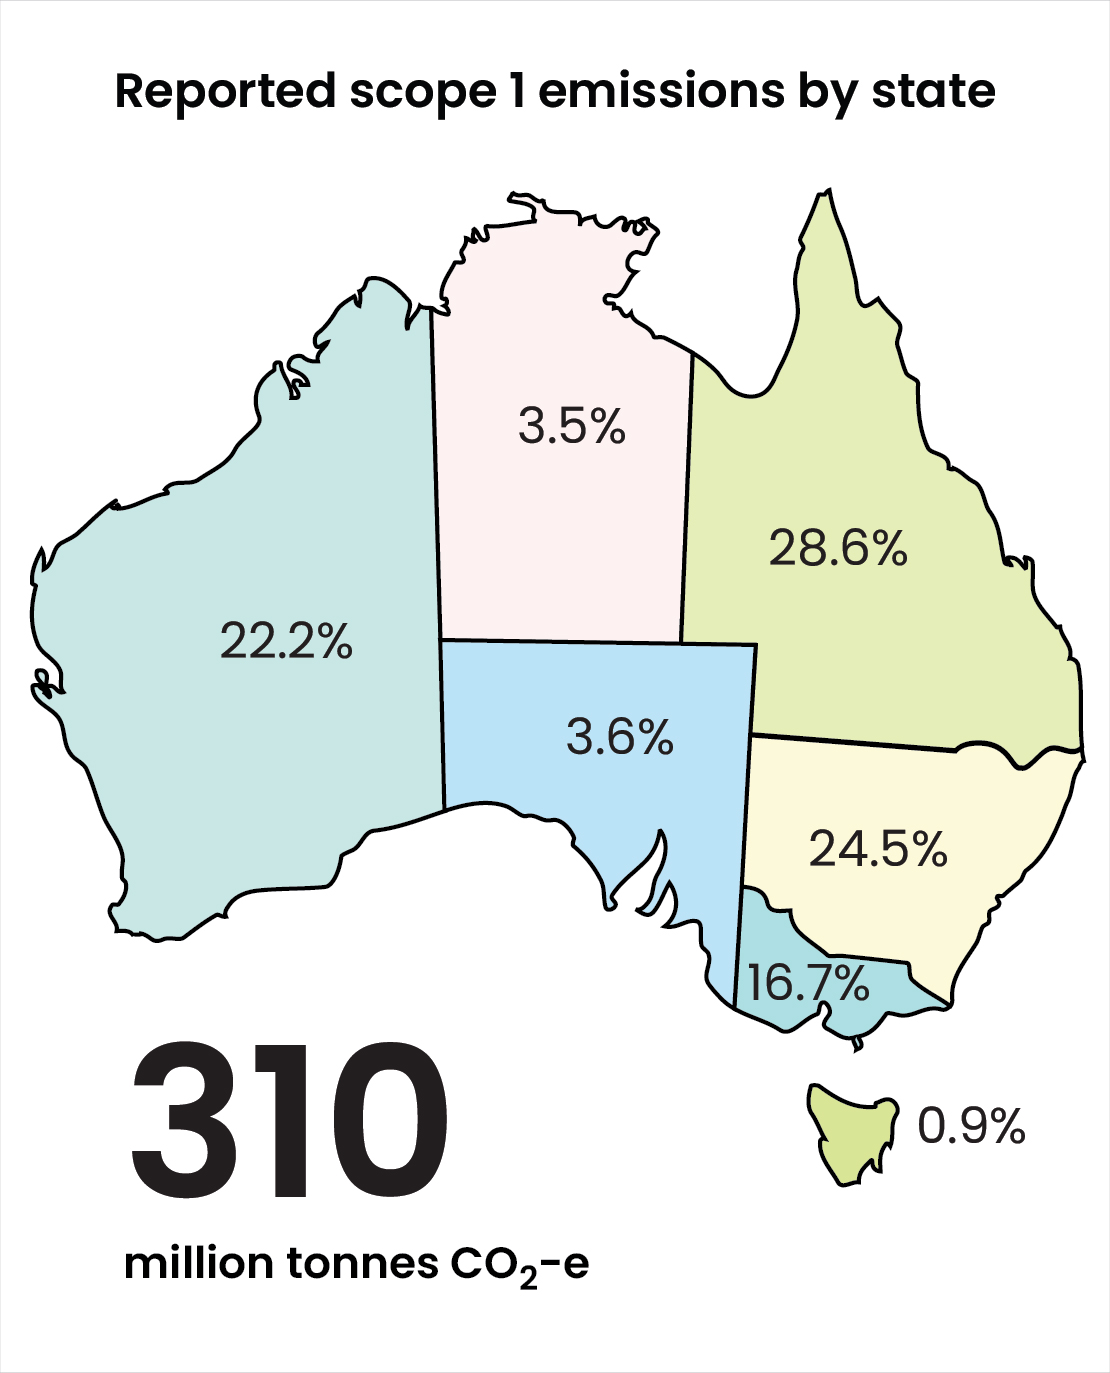 A map of Australia showing reported scope 1 emissions by state